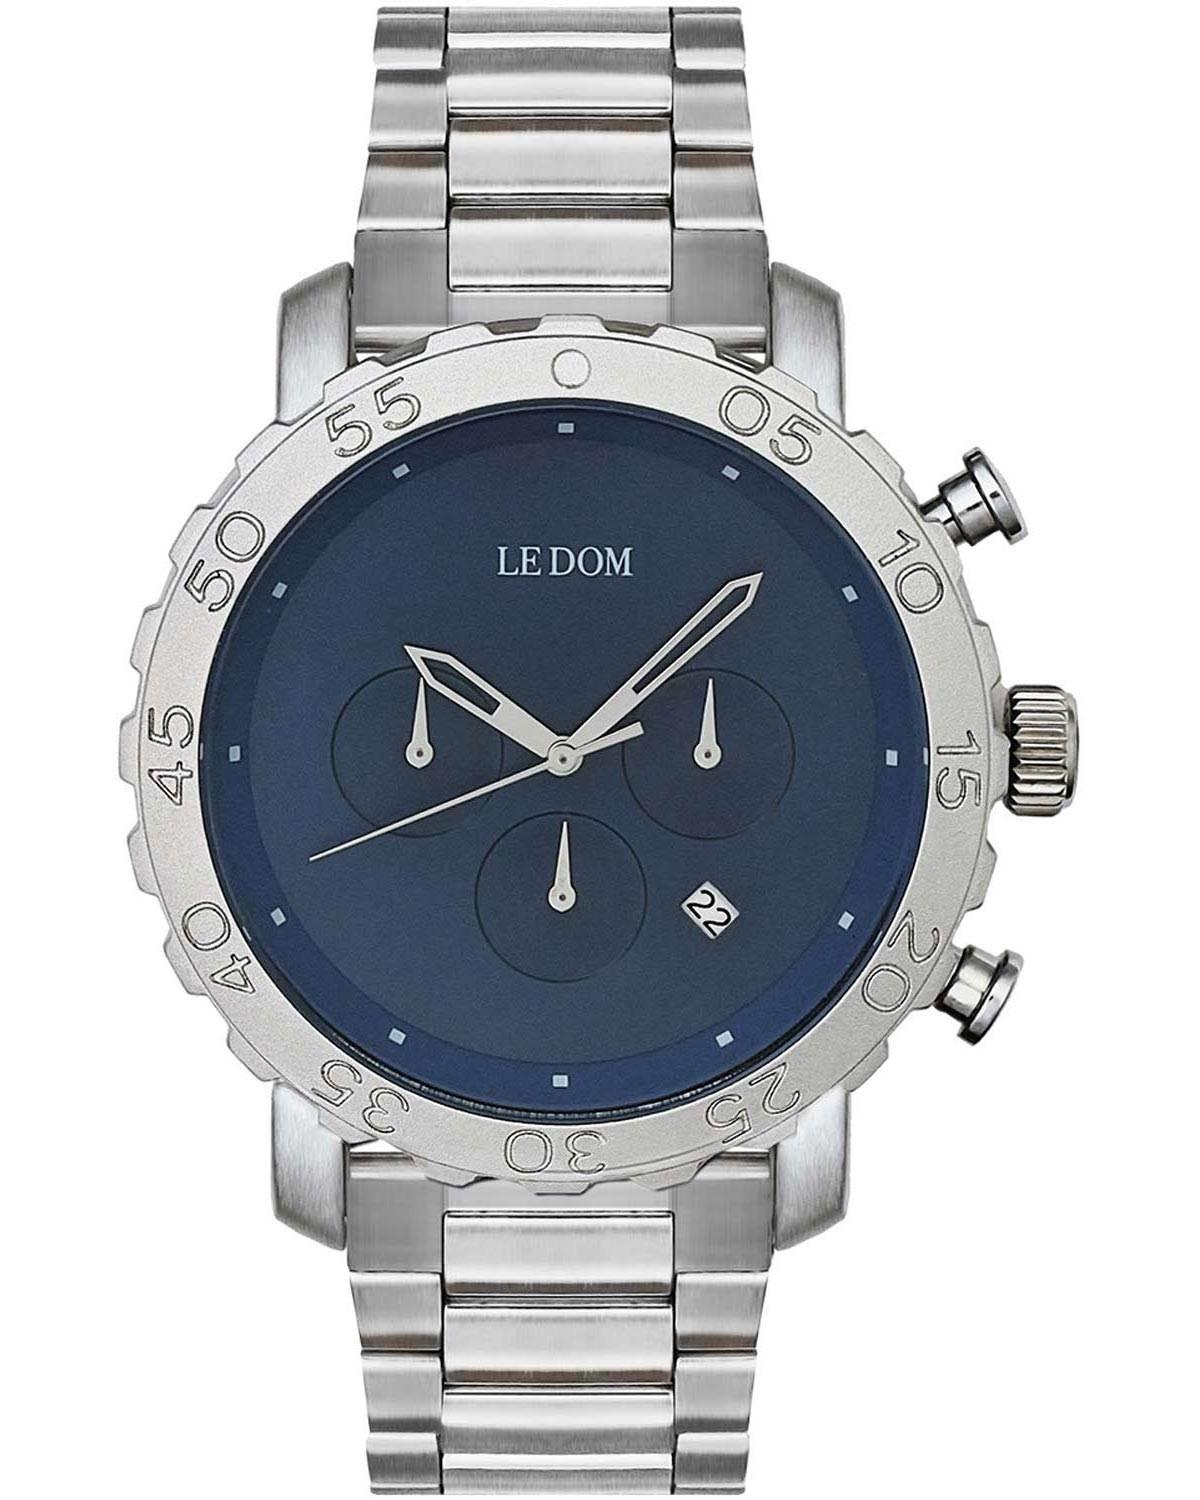 le dom pilot chronograph ld 1496 3 silver case with stainless steel bracelet image1